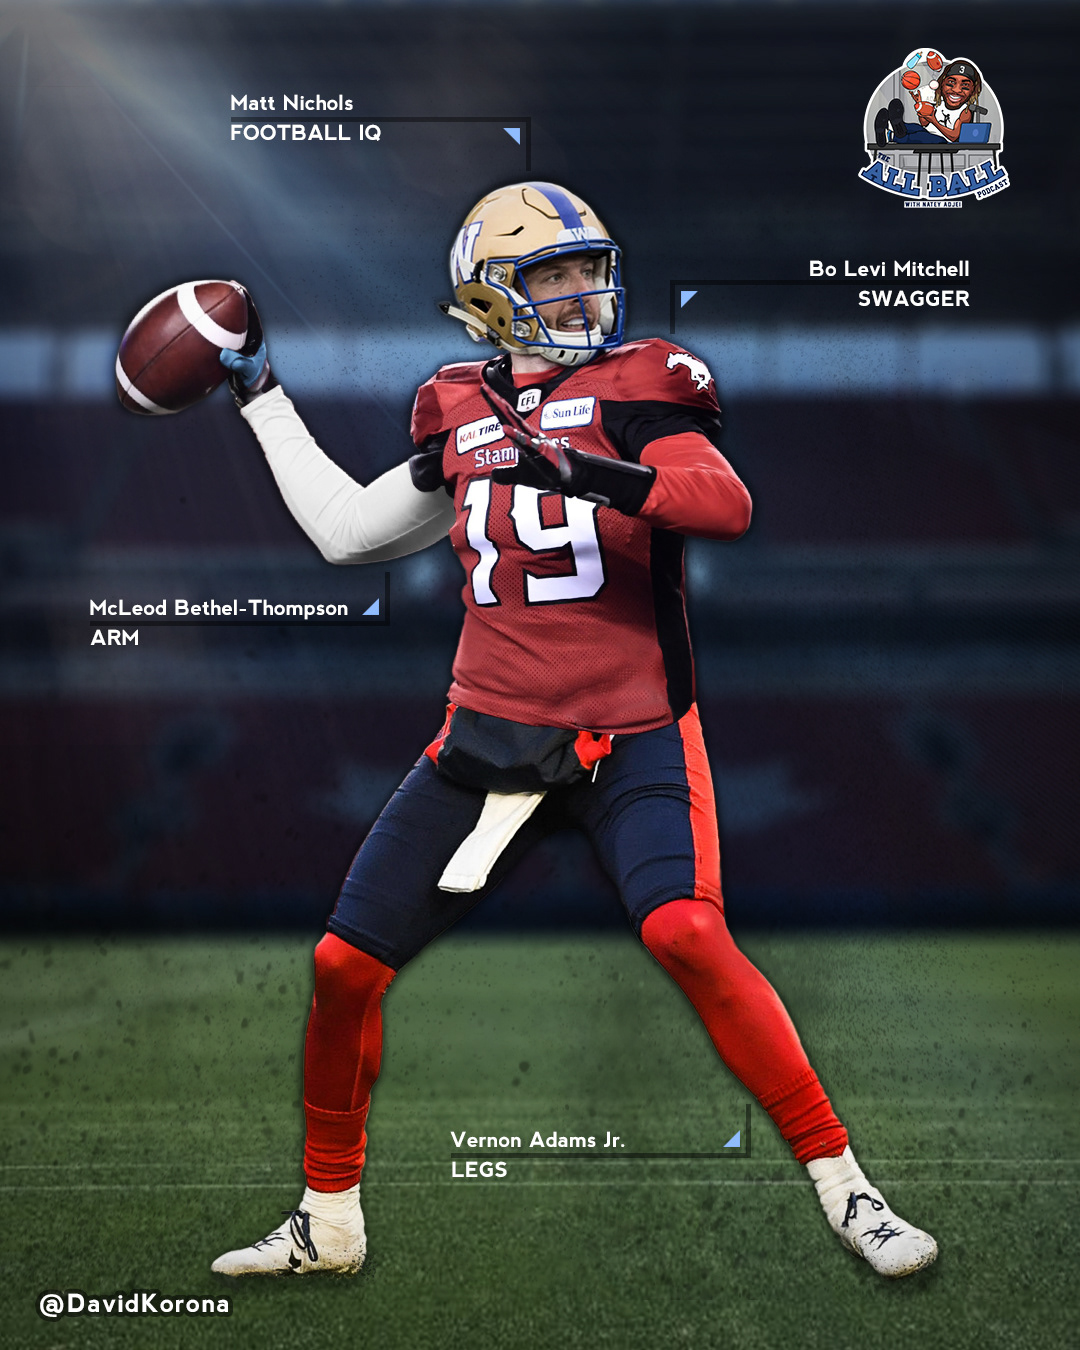 Photo compilation representing top aspects of various CFL Quarterbacks  merged into a single player.